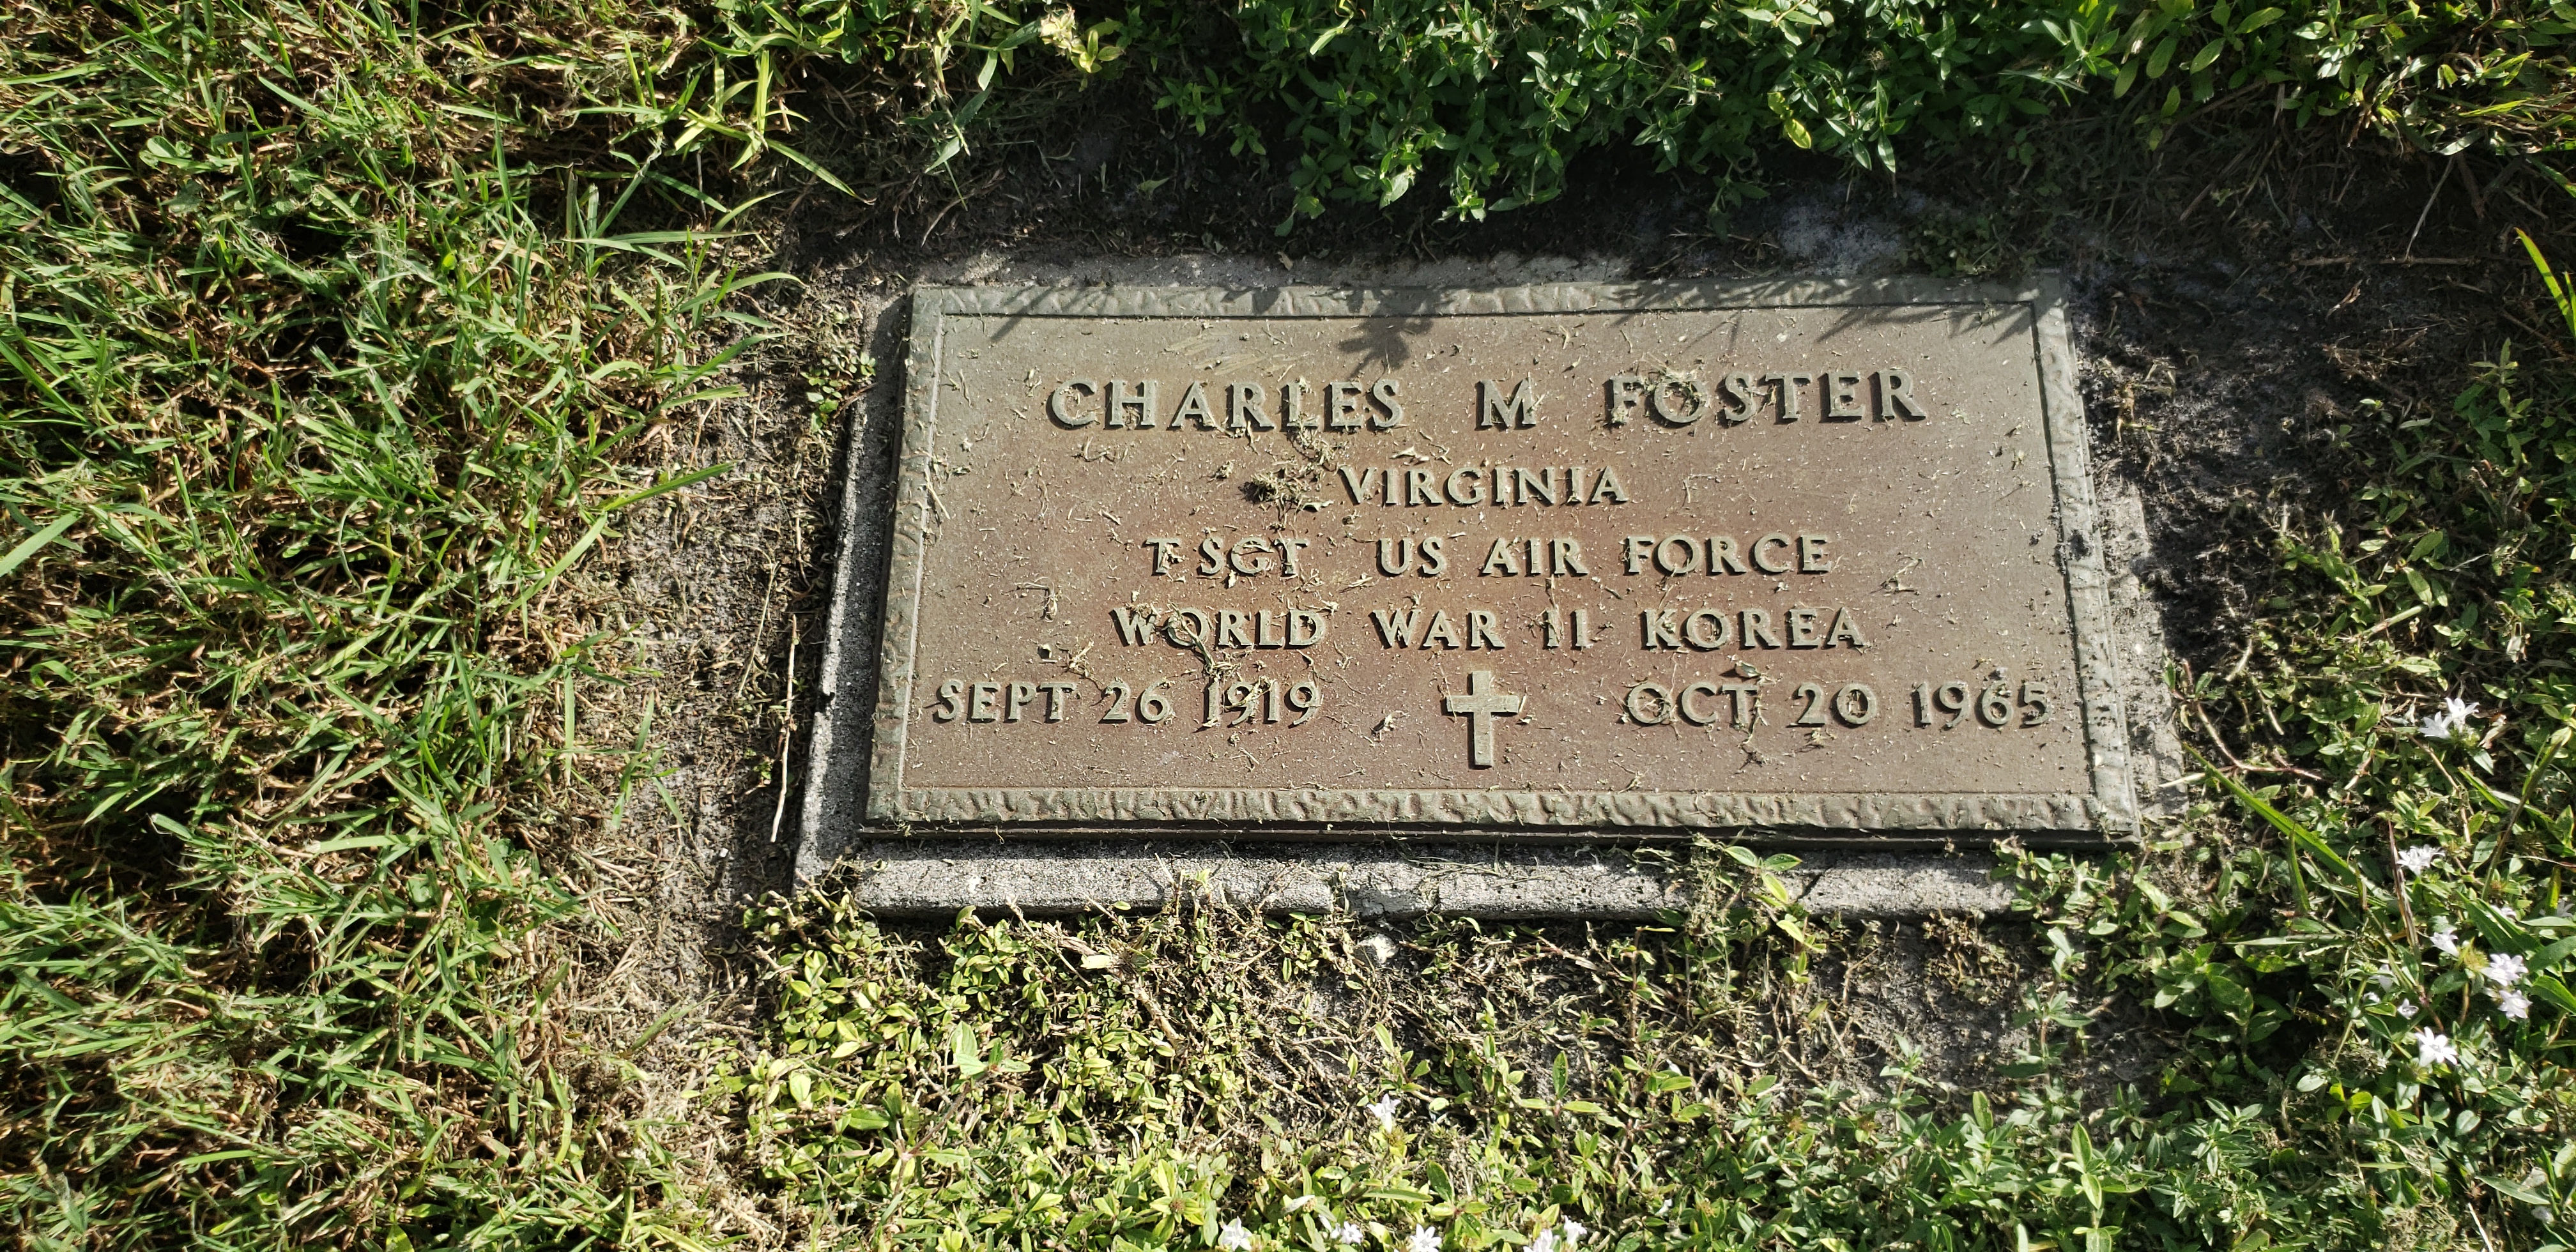 Charles M Foster